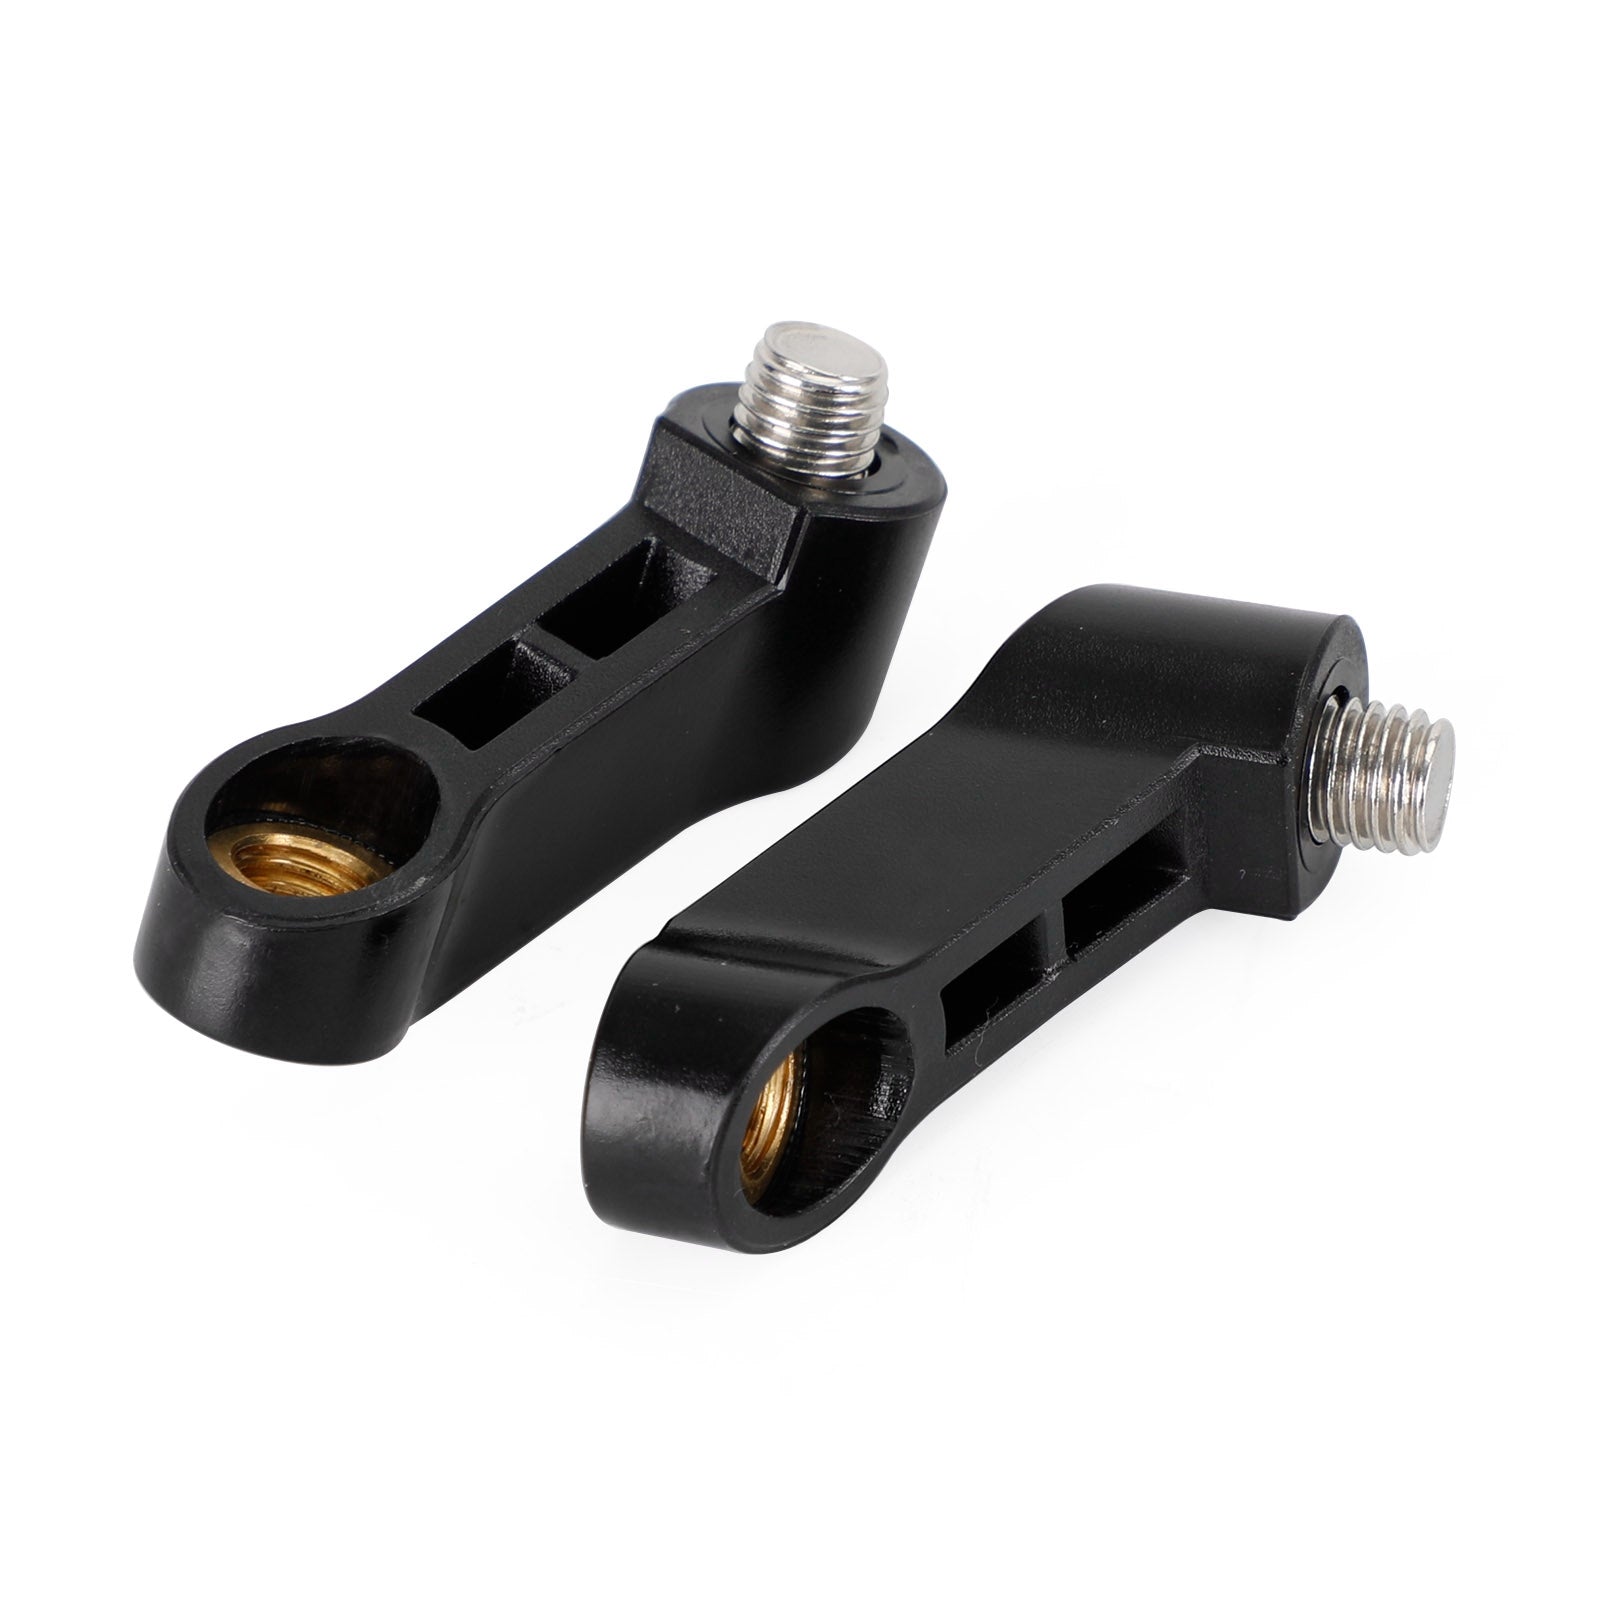 M10x1.5mm ABS Mirror Extender Extension Riser For BMW R1200GS F 900 S 1000 R/XR